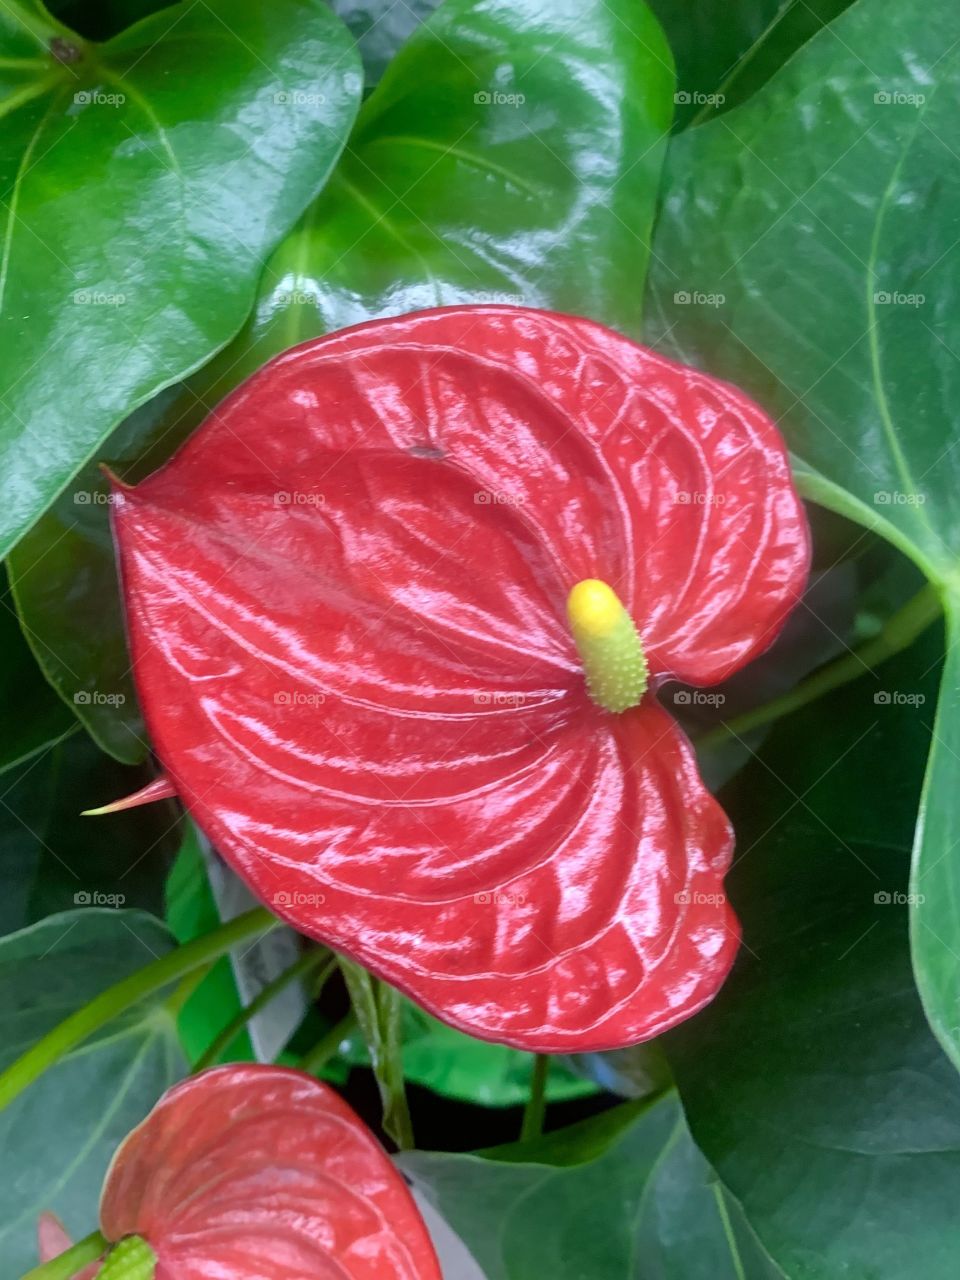 Green and red flowering plant